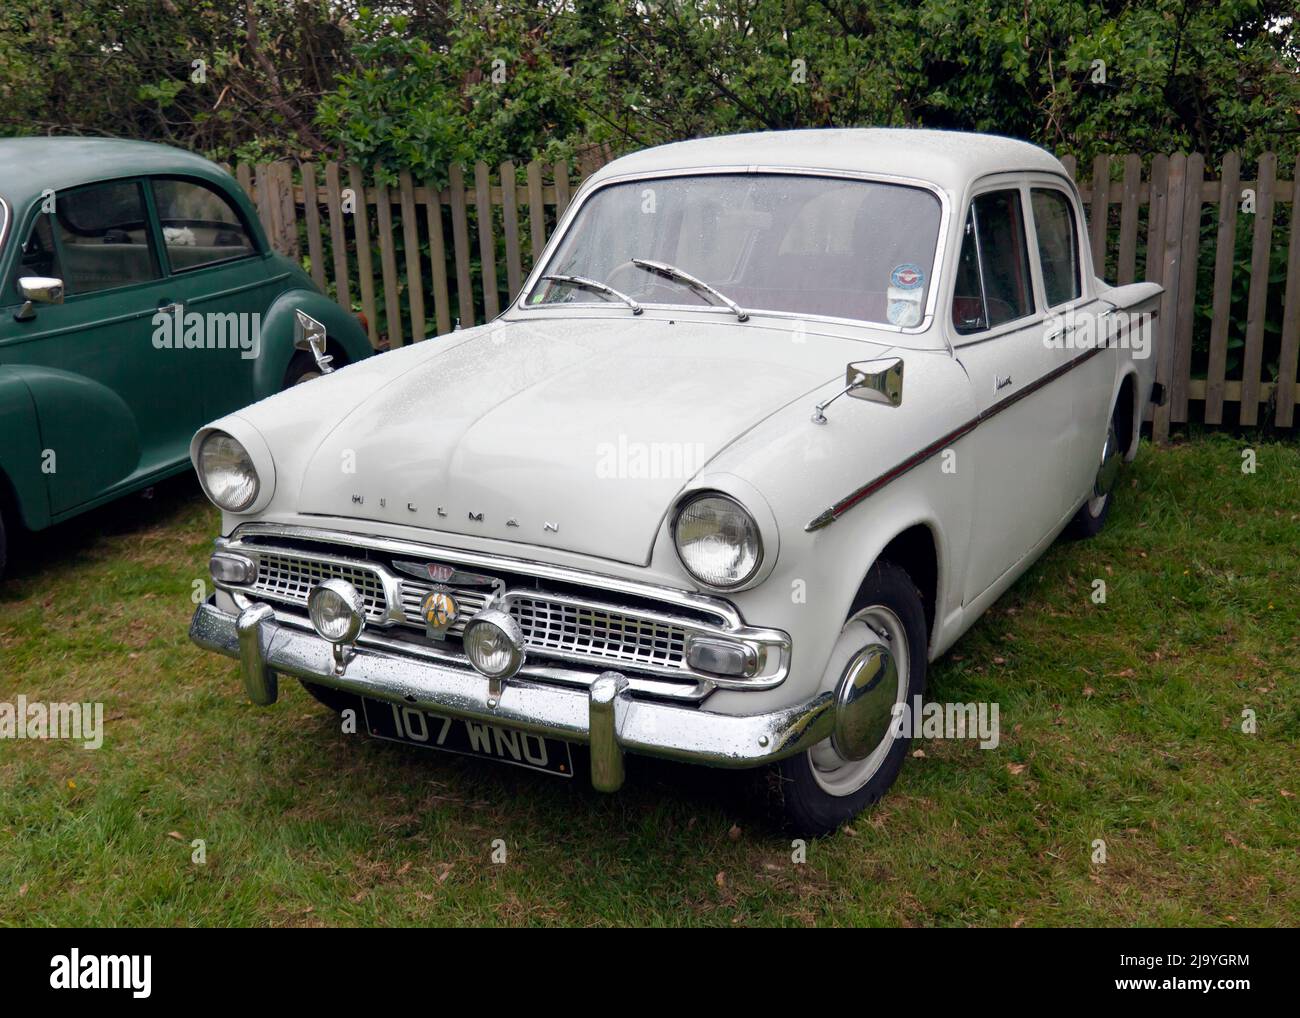 Three-quarters front view of a  White, 1961, Hillman Minx on display at the Stock Photo